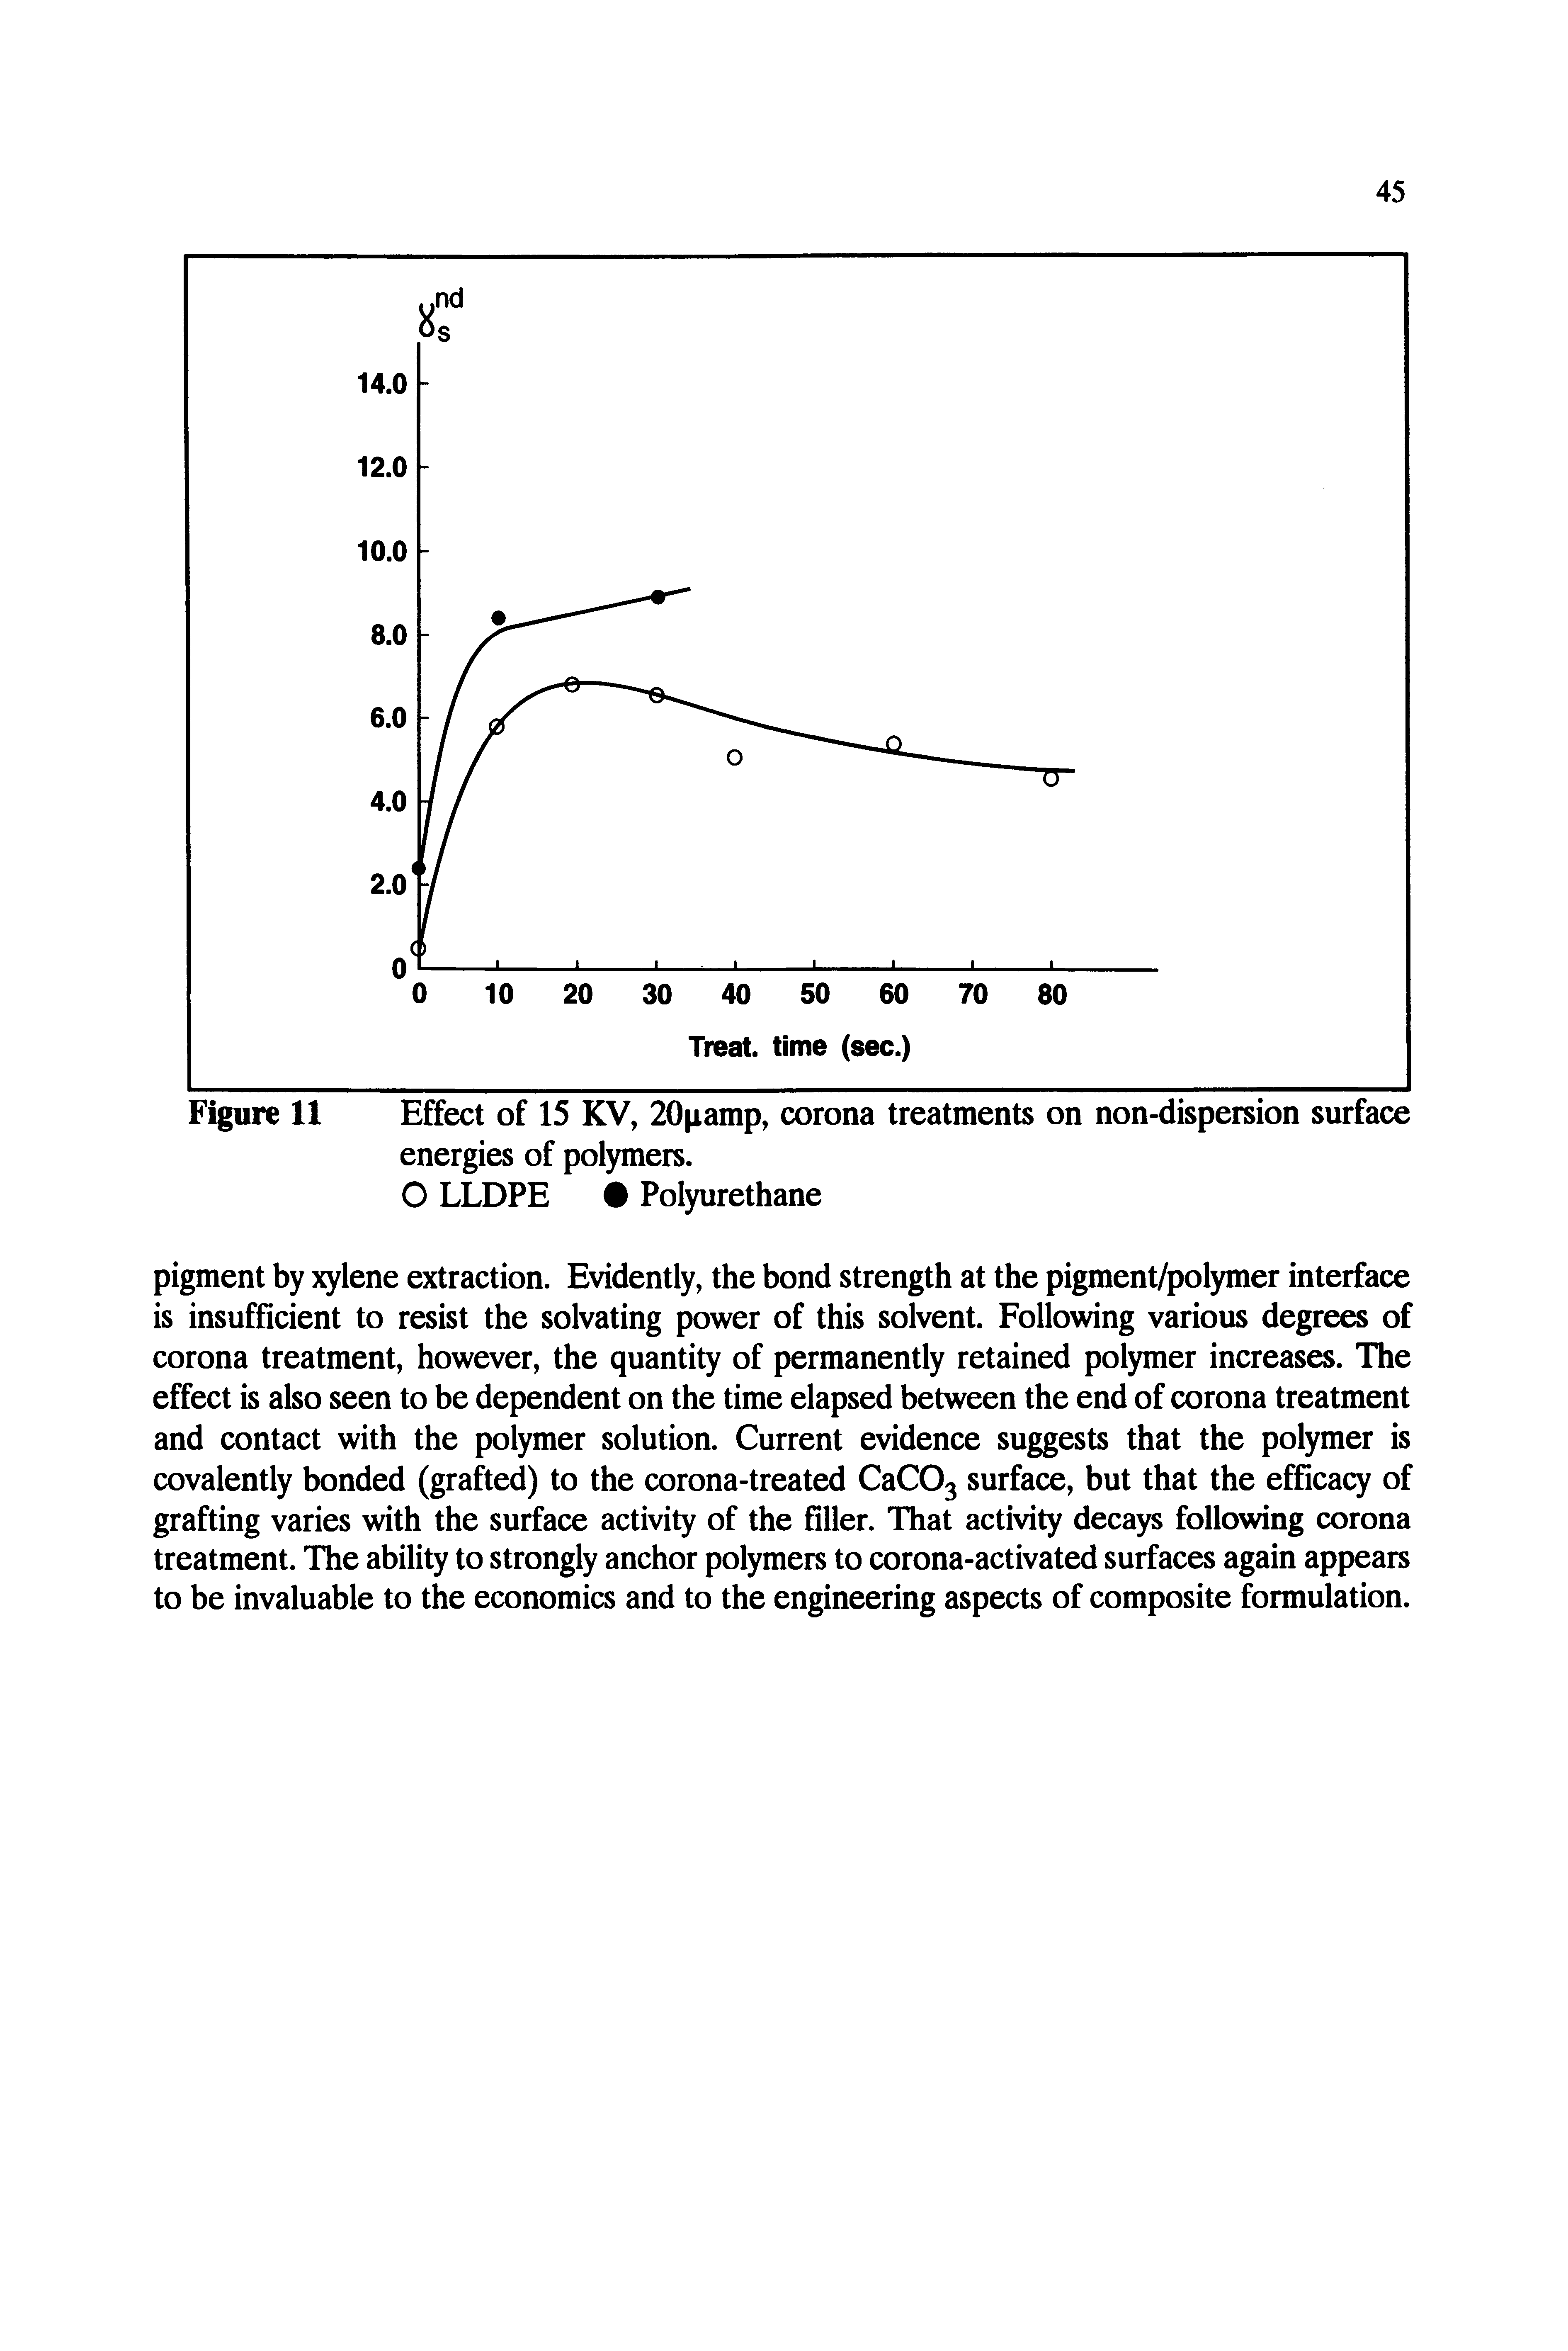 Figure 11 Effect of 15 KV, 20 iamp, corona treatments on non-dispersion surface energies of polymers.